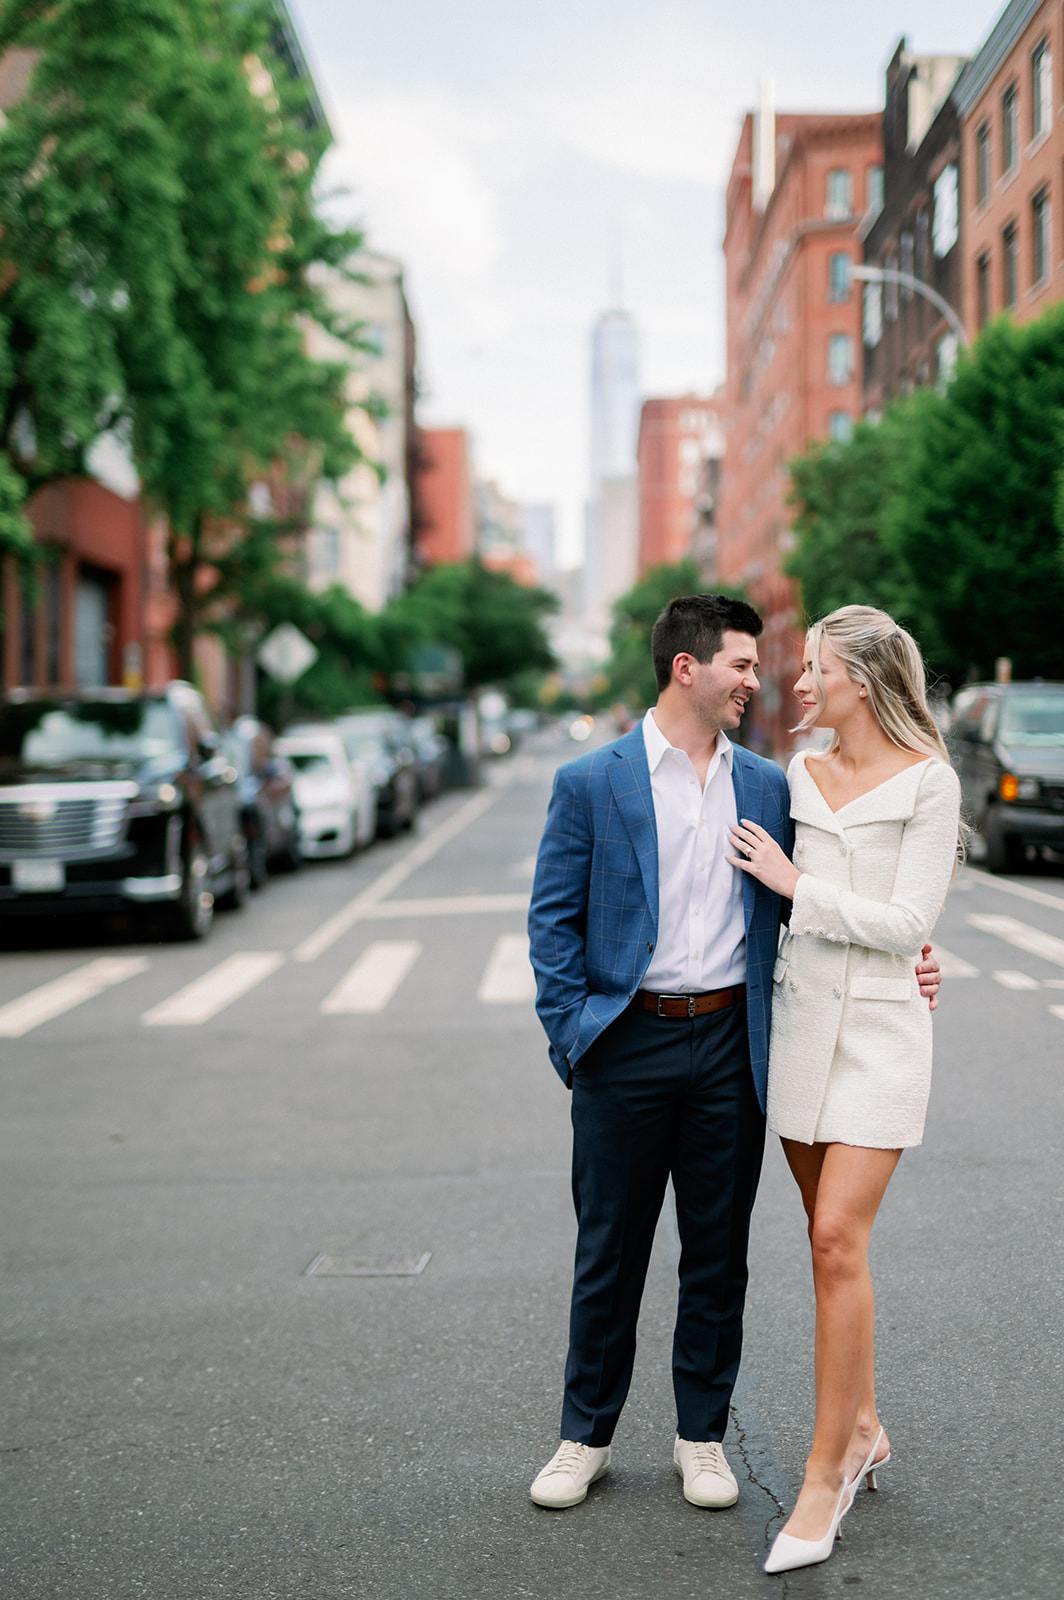 City couples New York engagement session.